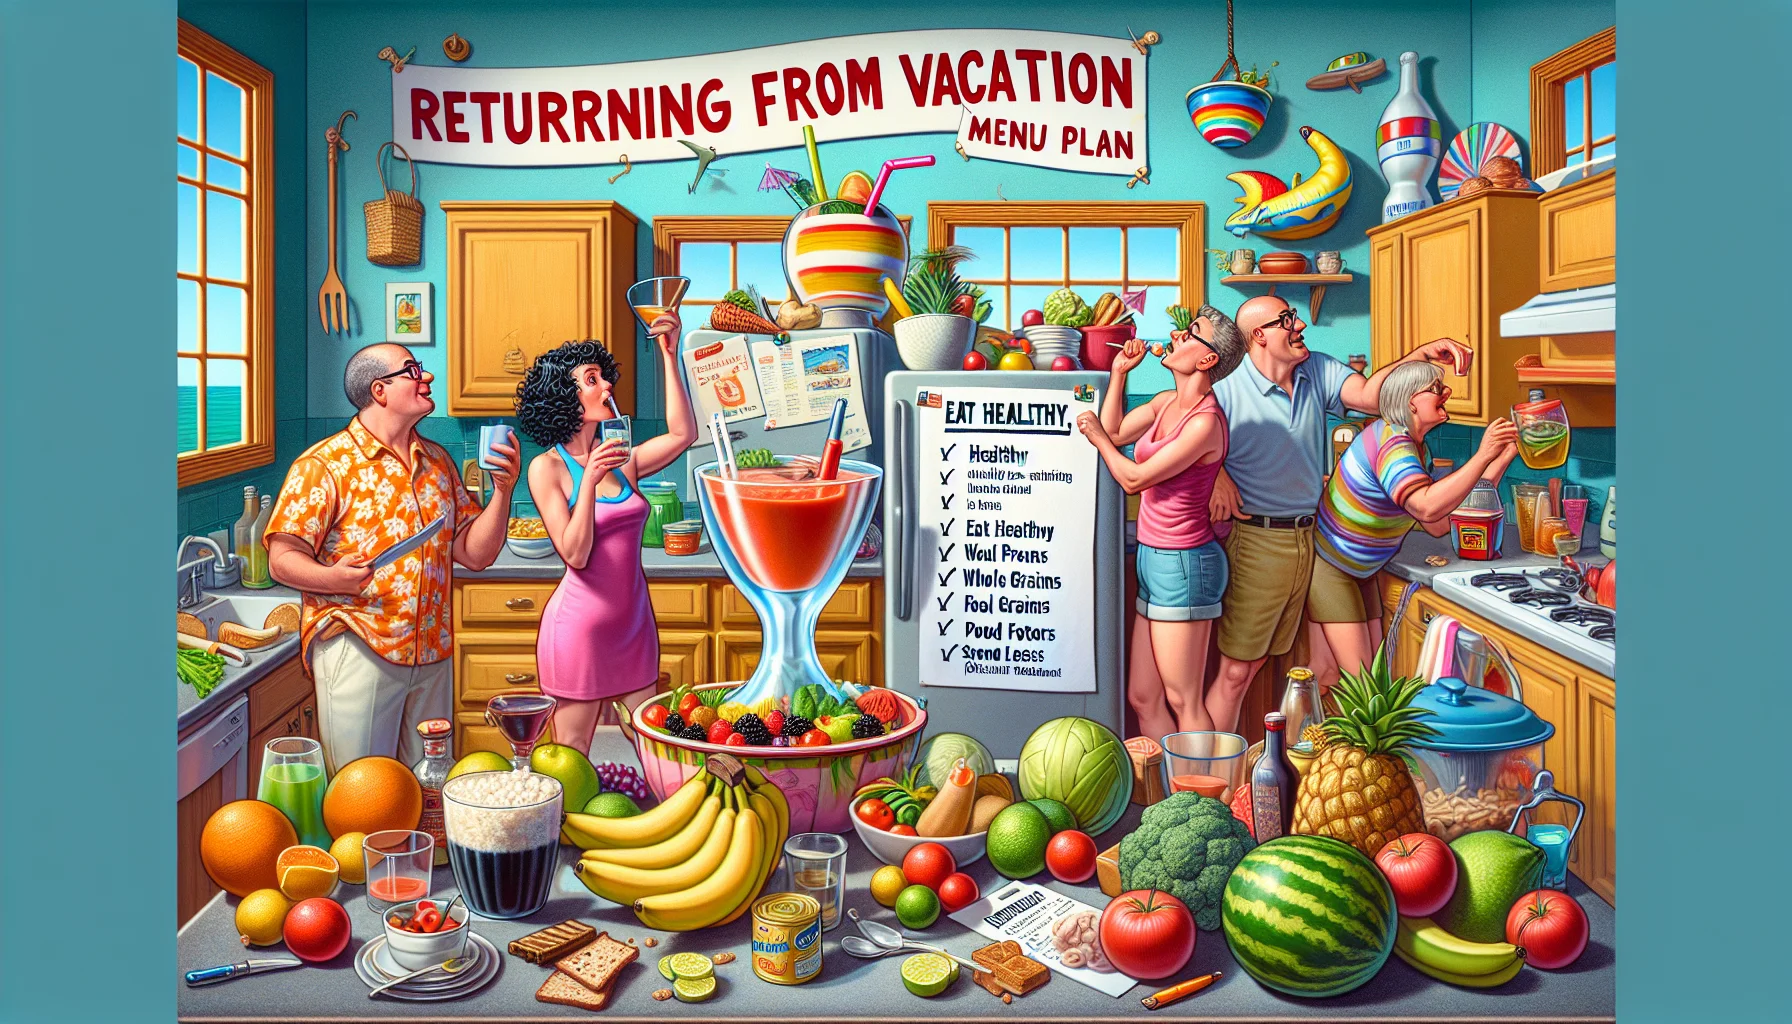 Conjure an amusing and realistic scenario, filled with vibrant colors and clever details, centering around the theme of 'Returning from Vacation: Menu Plan'. The scene might include a diverse group of people humorously struggling to readjust to the routine of cooking at home. Their kitchen counter is strewn with healthy, budget-friendly foods: fruits, vegetables, lean proteins, whole grains. A shopping list on the refrigerator door includes 'Eat Healthy, Spend Less' as the number one point. Juxtapose this against a kitschy souvenir from their vacation, such as a giant cocktail glass or over-the-top pool float, that's hilariously out of place in this domestic setting.